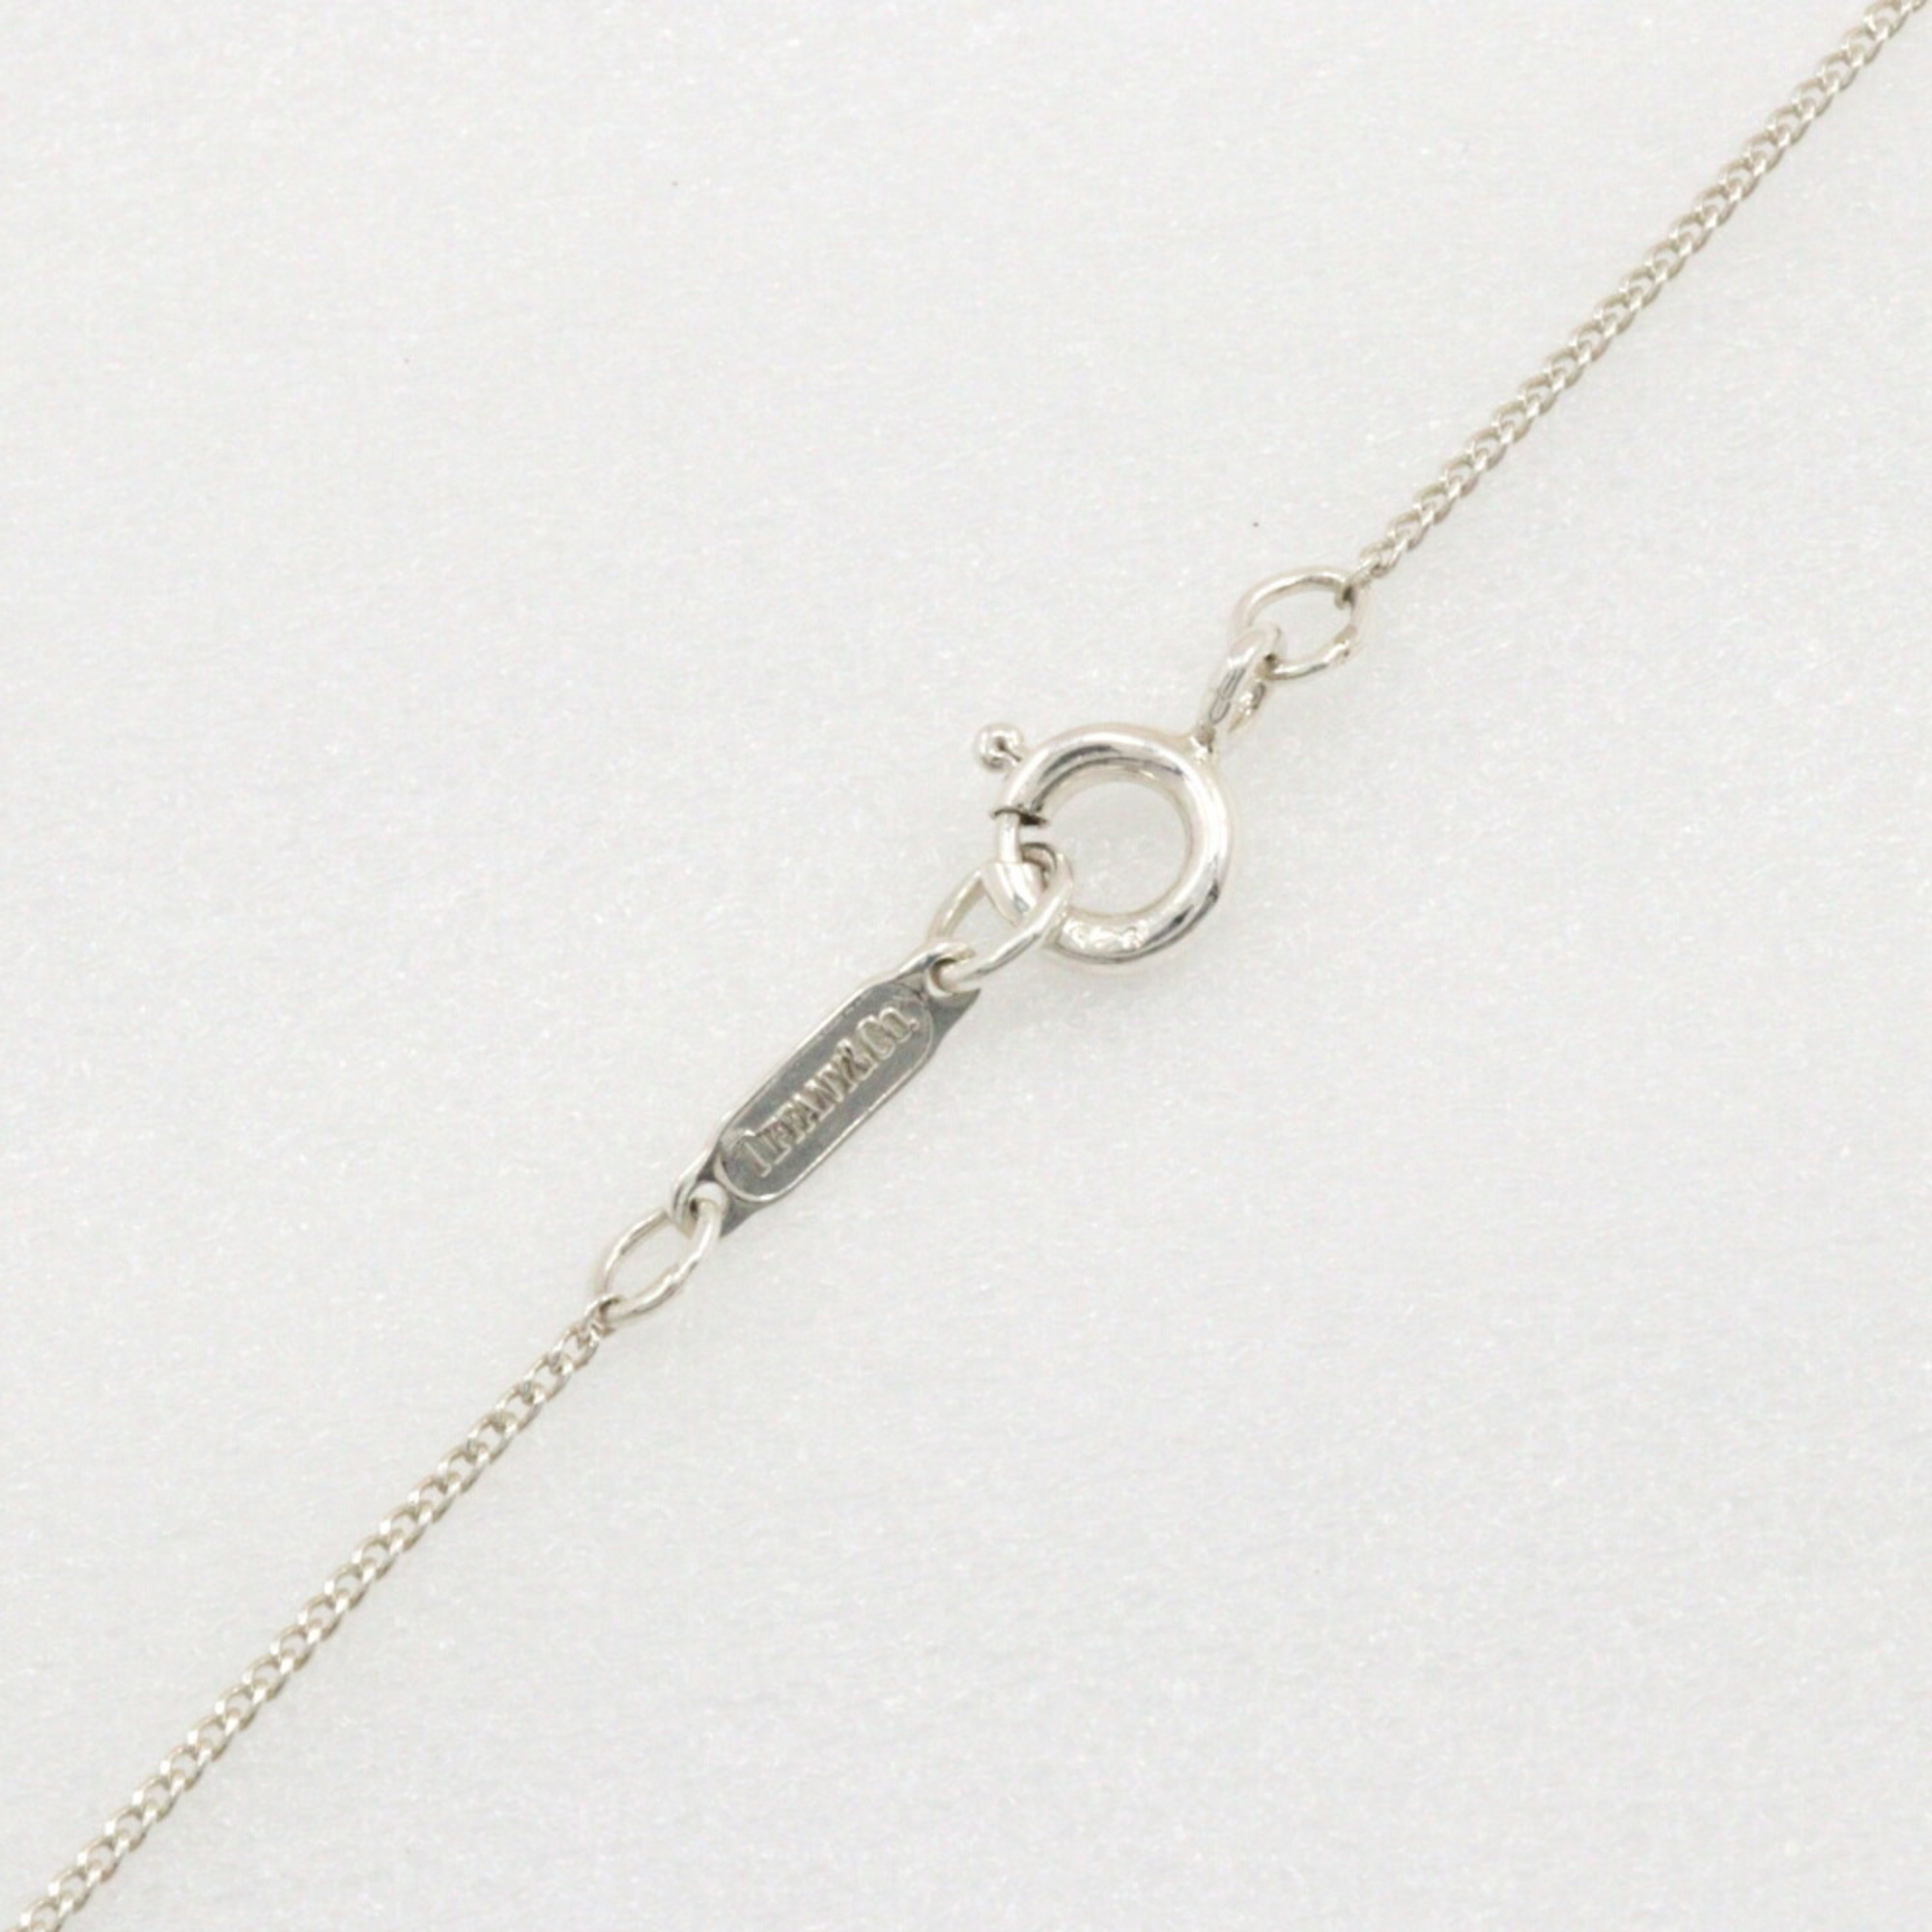 Tiffany & Co. Necklace, 925 silver x 18K yellow gold, heart, approx. 4.7g, for women